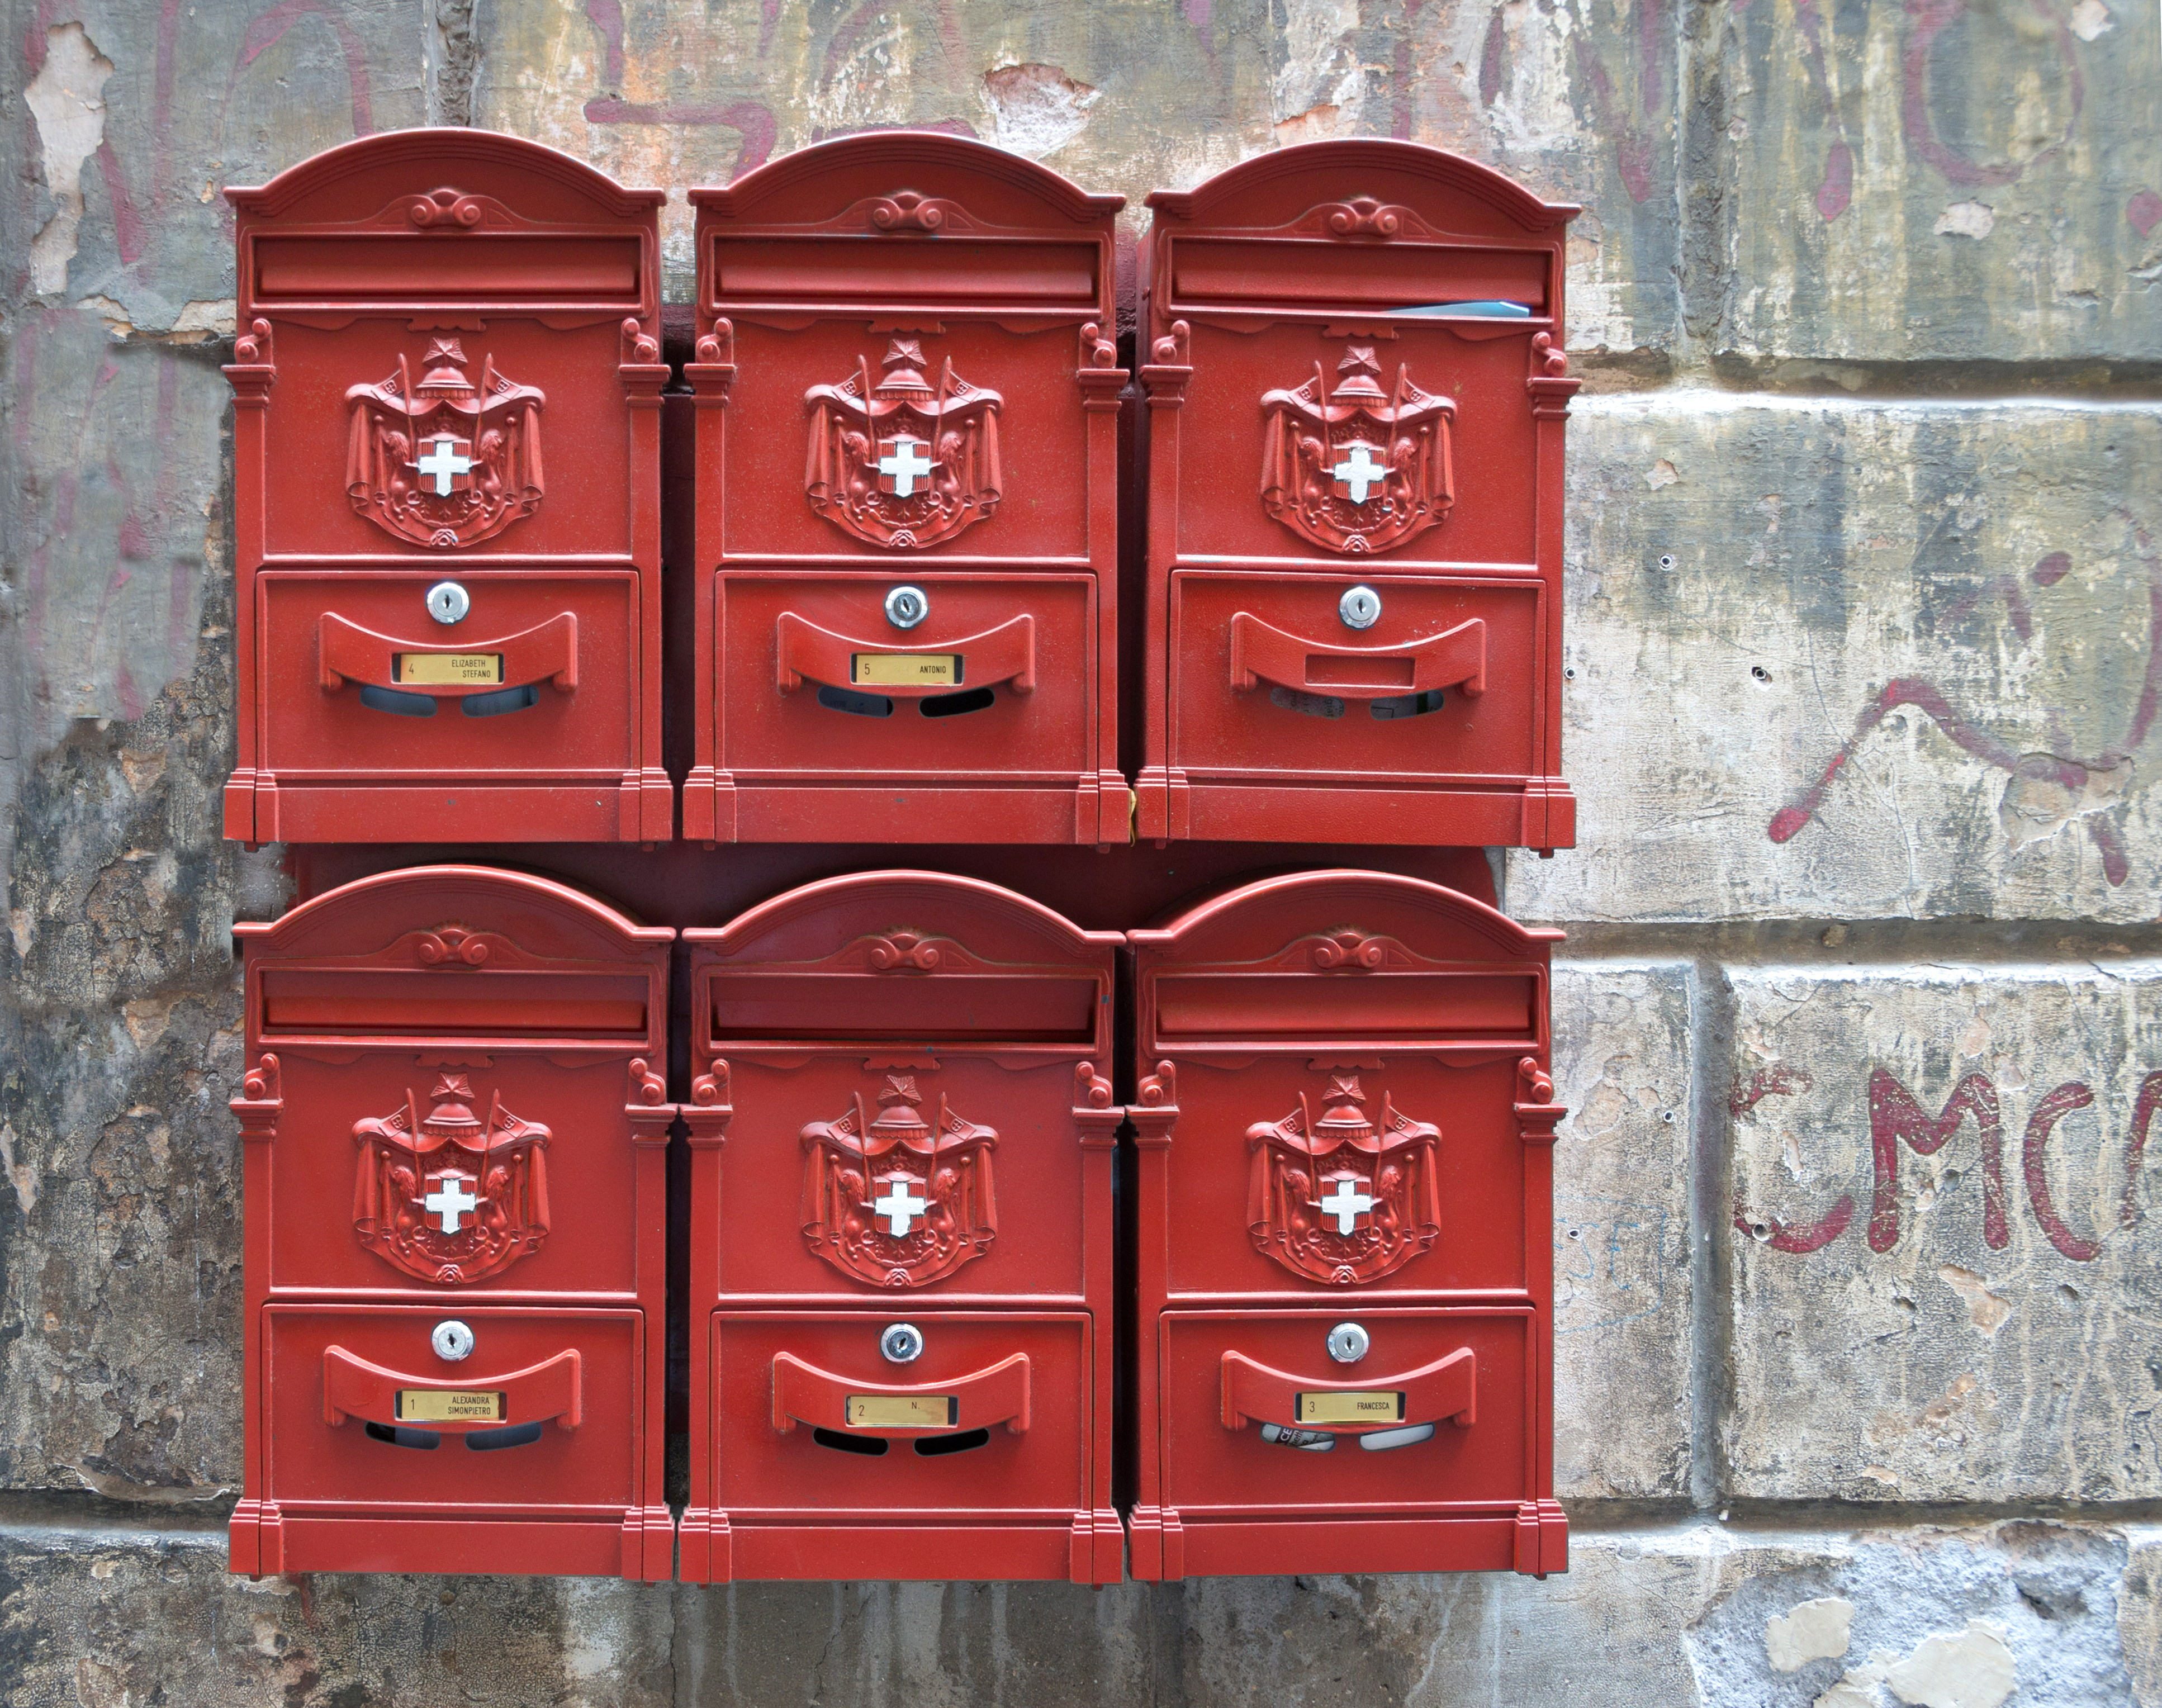 Mail boxes, Rome, Italy